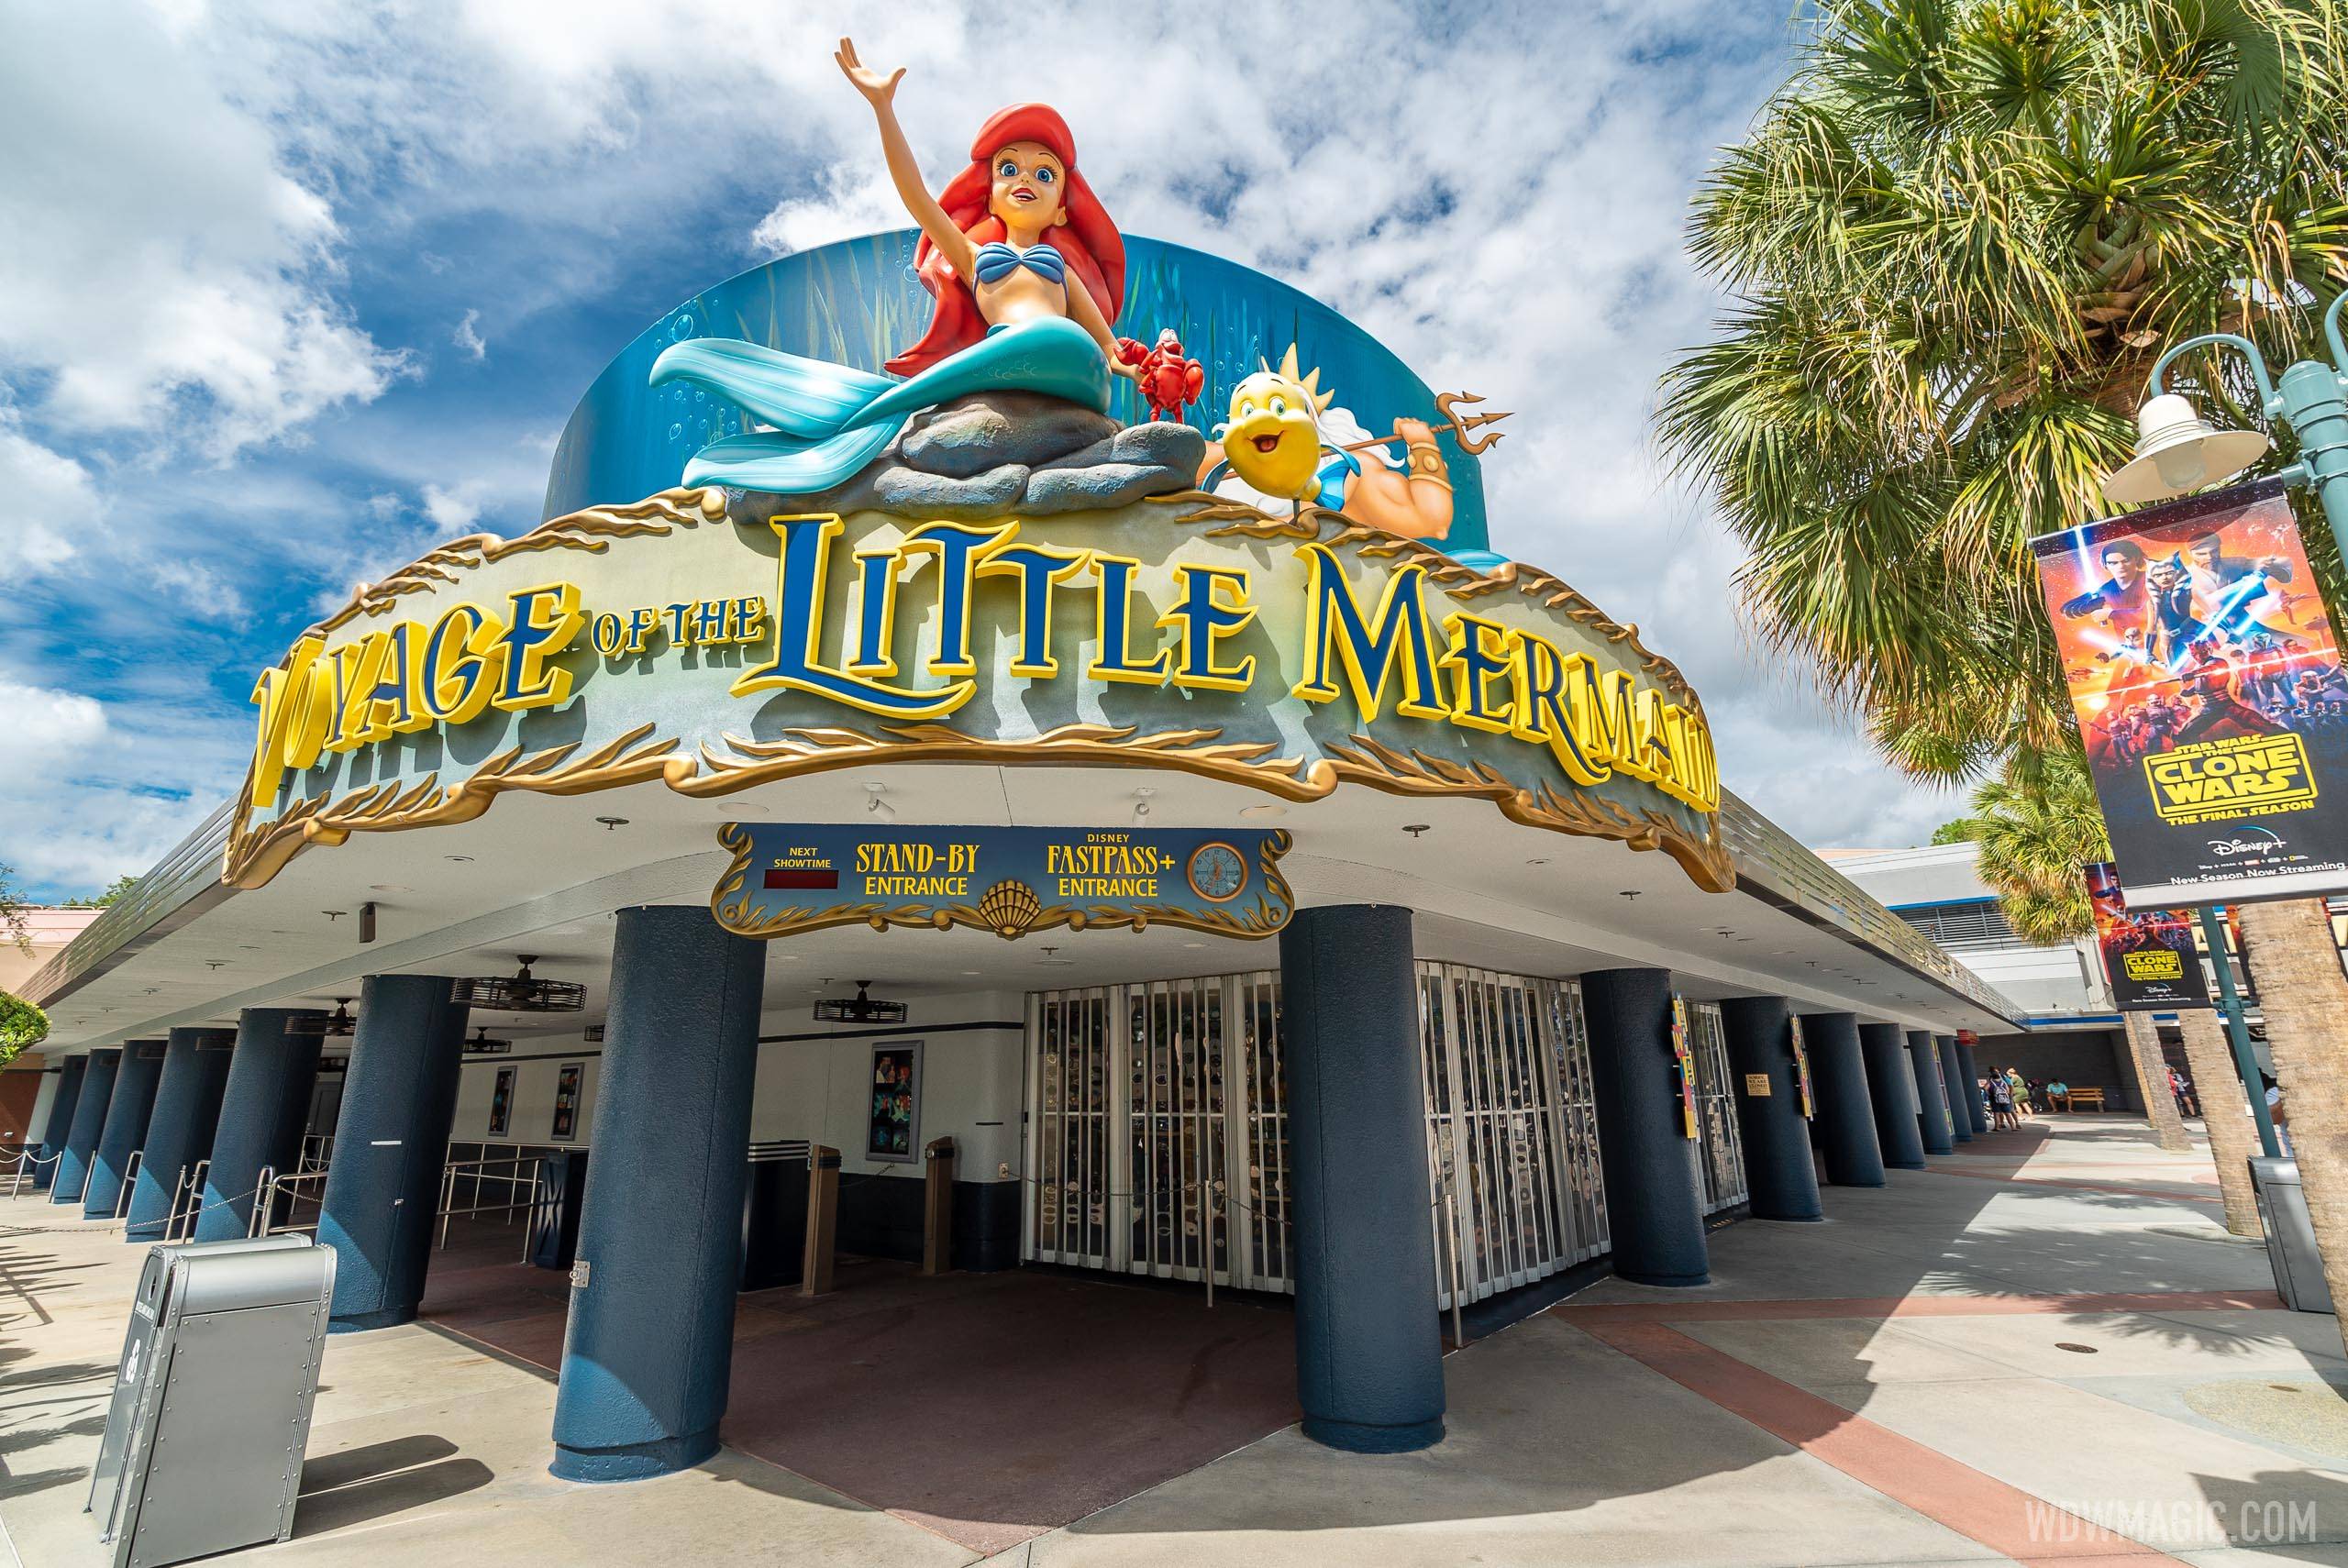 Voyage of the Little Mermaid overview